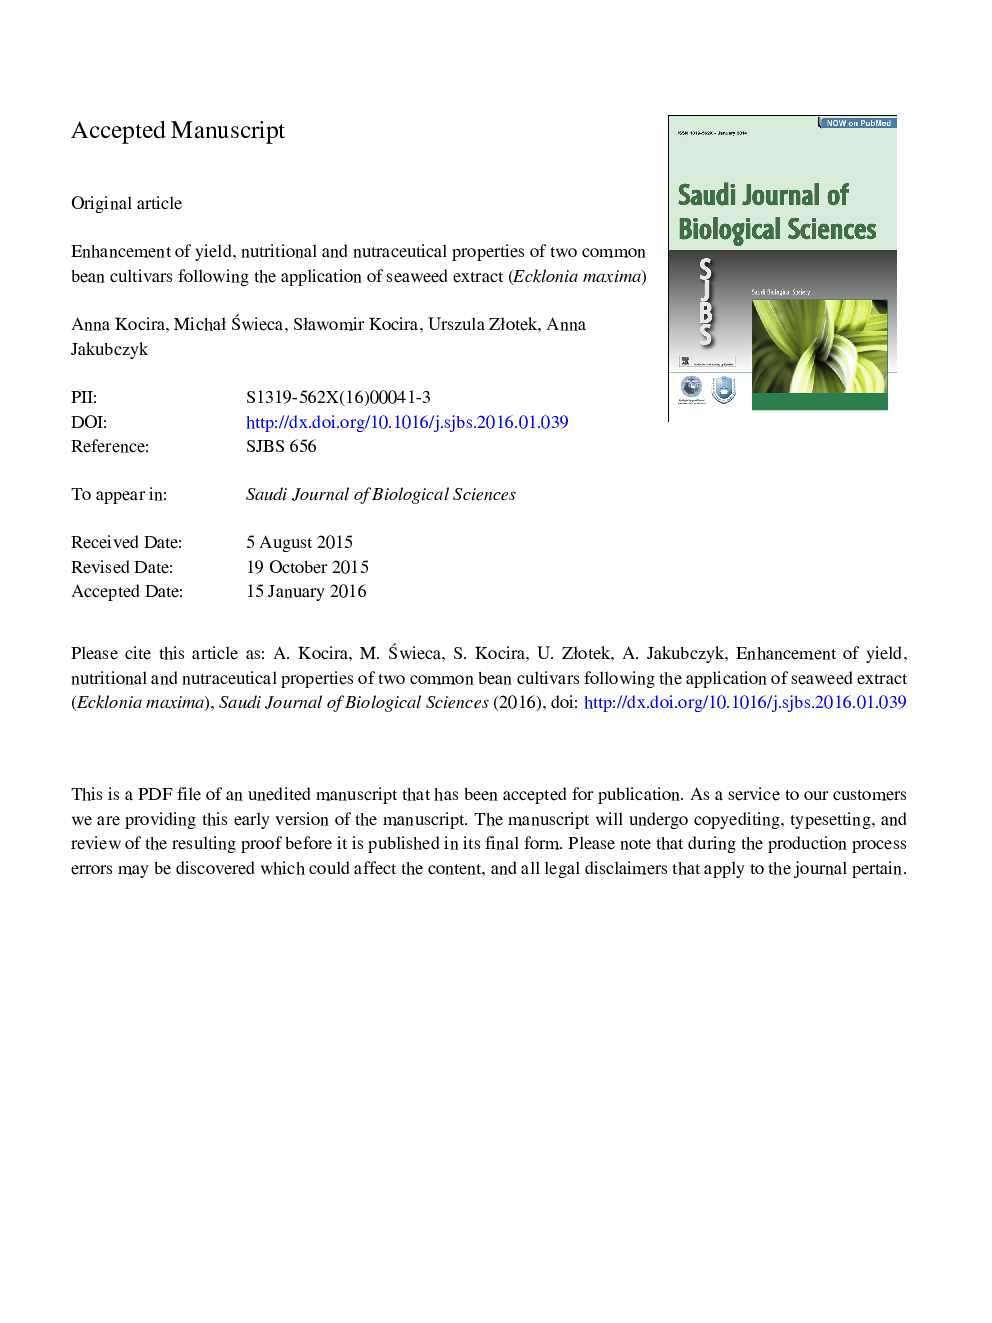 Enhancement of yield, nutritional and nutraceutical properties of two common bean cultivars following the application of seaweed extract (Ecklonia maxima)